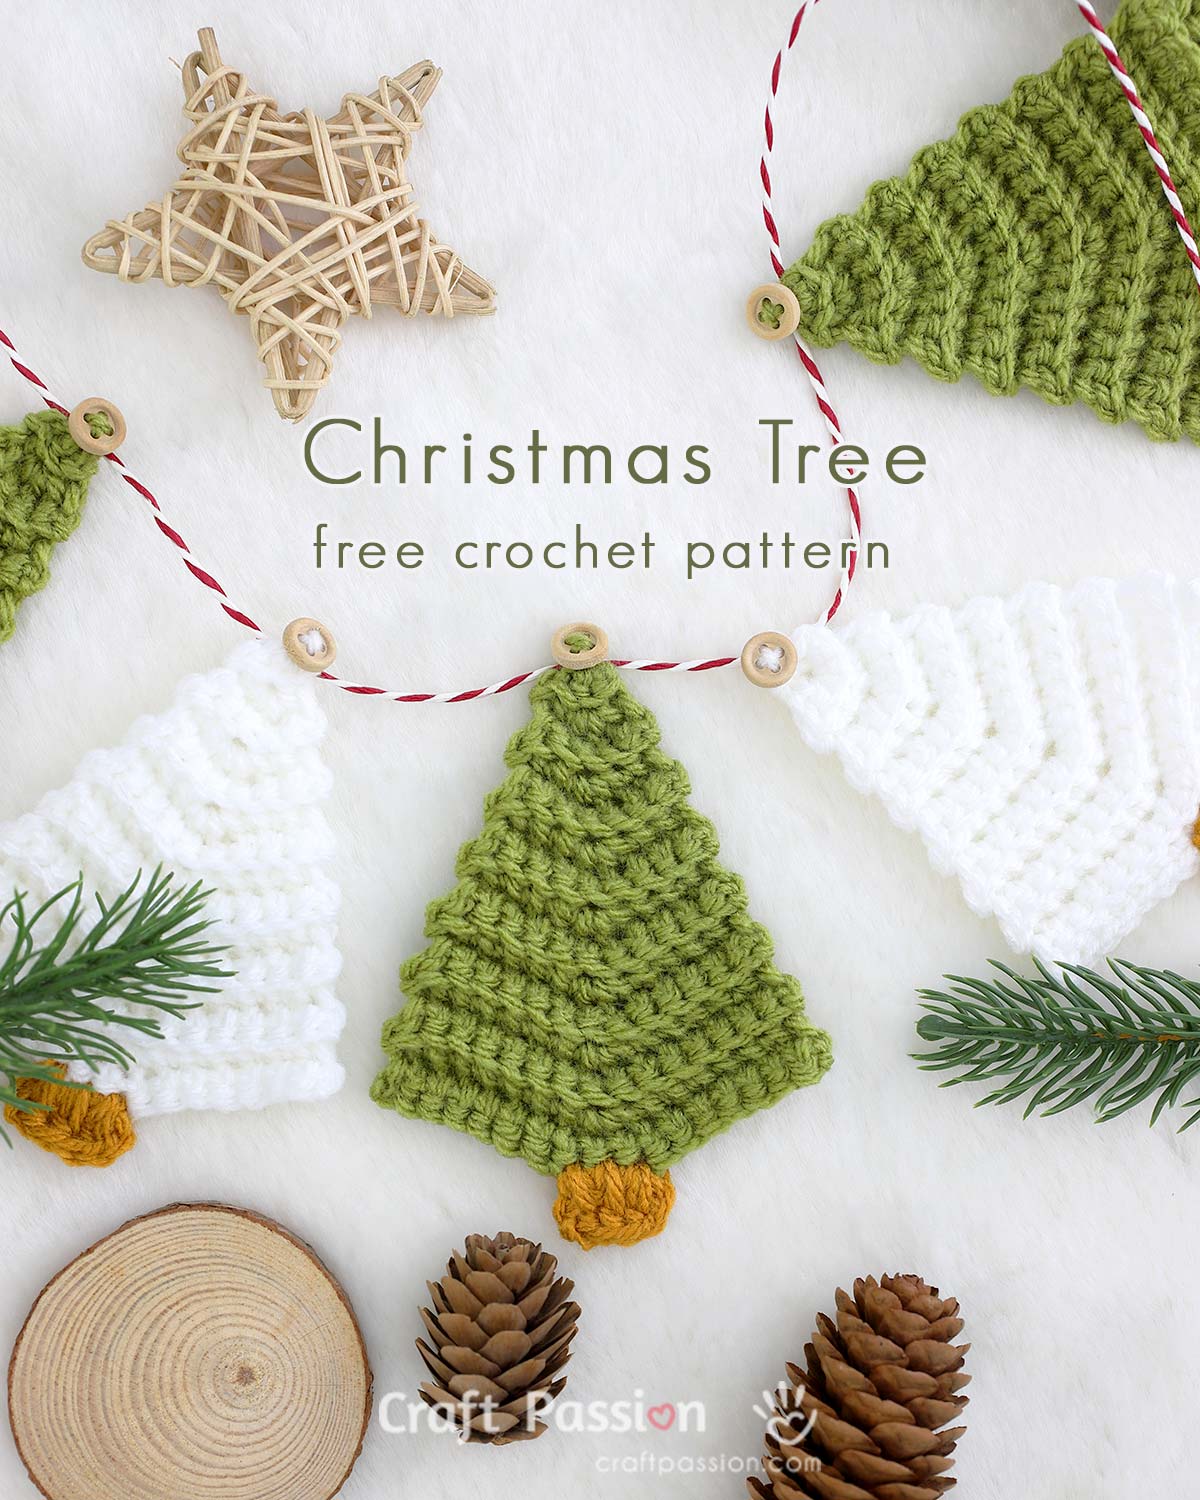 Free crochet Christmas tree pattern: quick & easy! Perfect for garlands, gift tags, or ornaments. Add a handmade touch to your holiday decor.